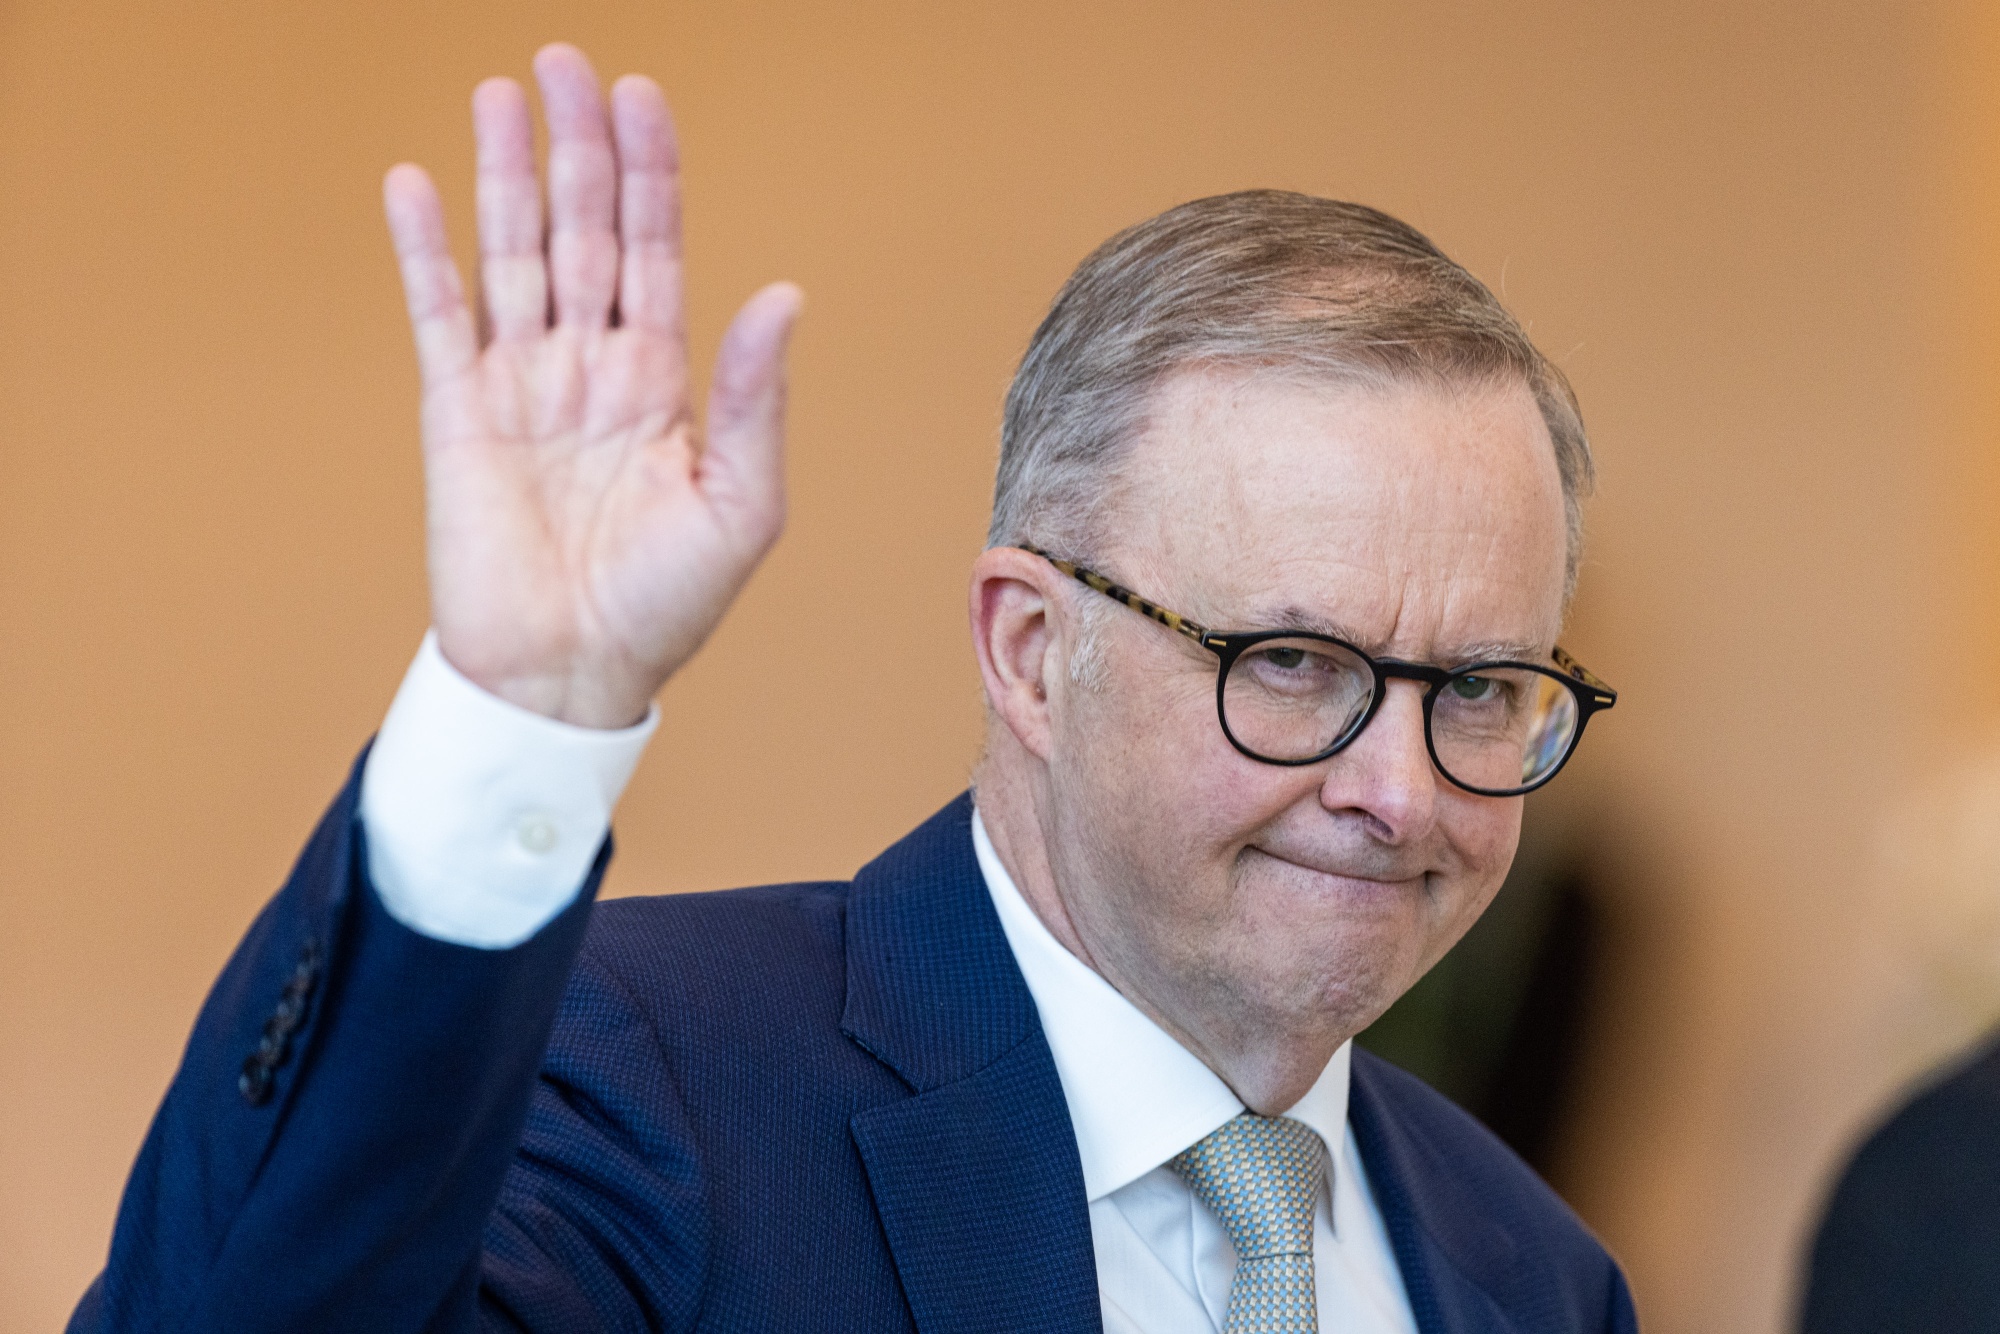 Australian PM Anthony Albanese to visit India from March 8-11